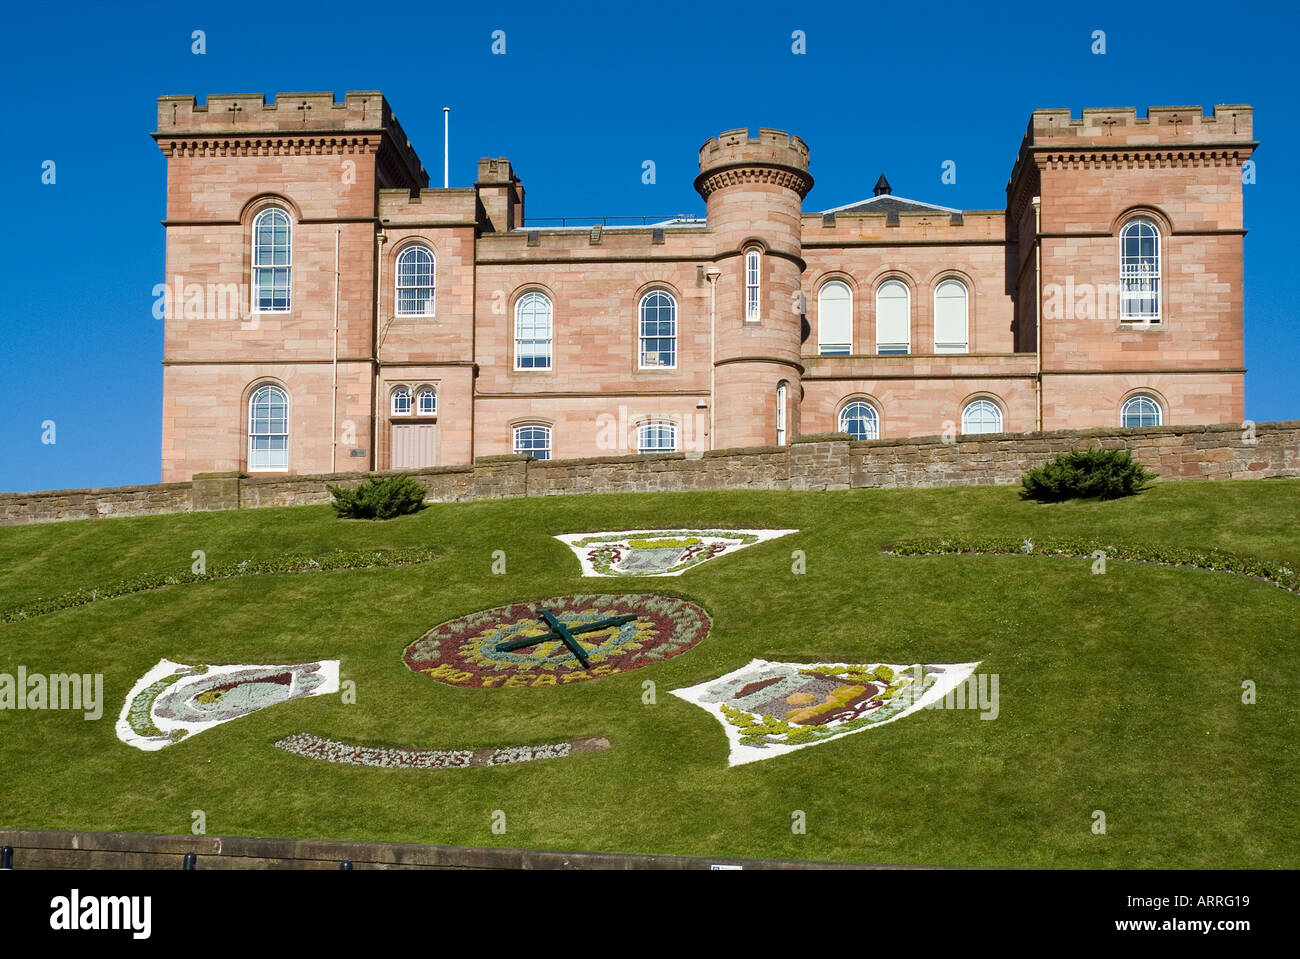 dh Inverness Castle INVERNESS INVERNESSSHIRE Scotland sherriff court building and floral display scottish highland castles Stock Photo